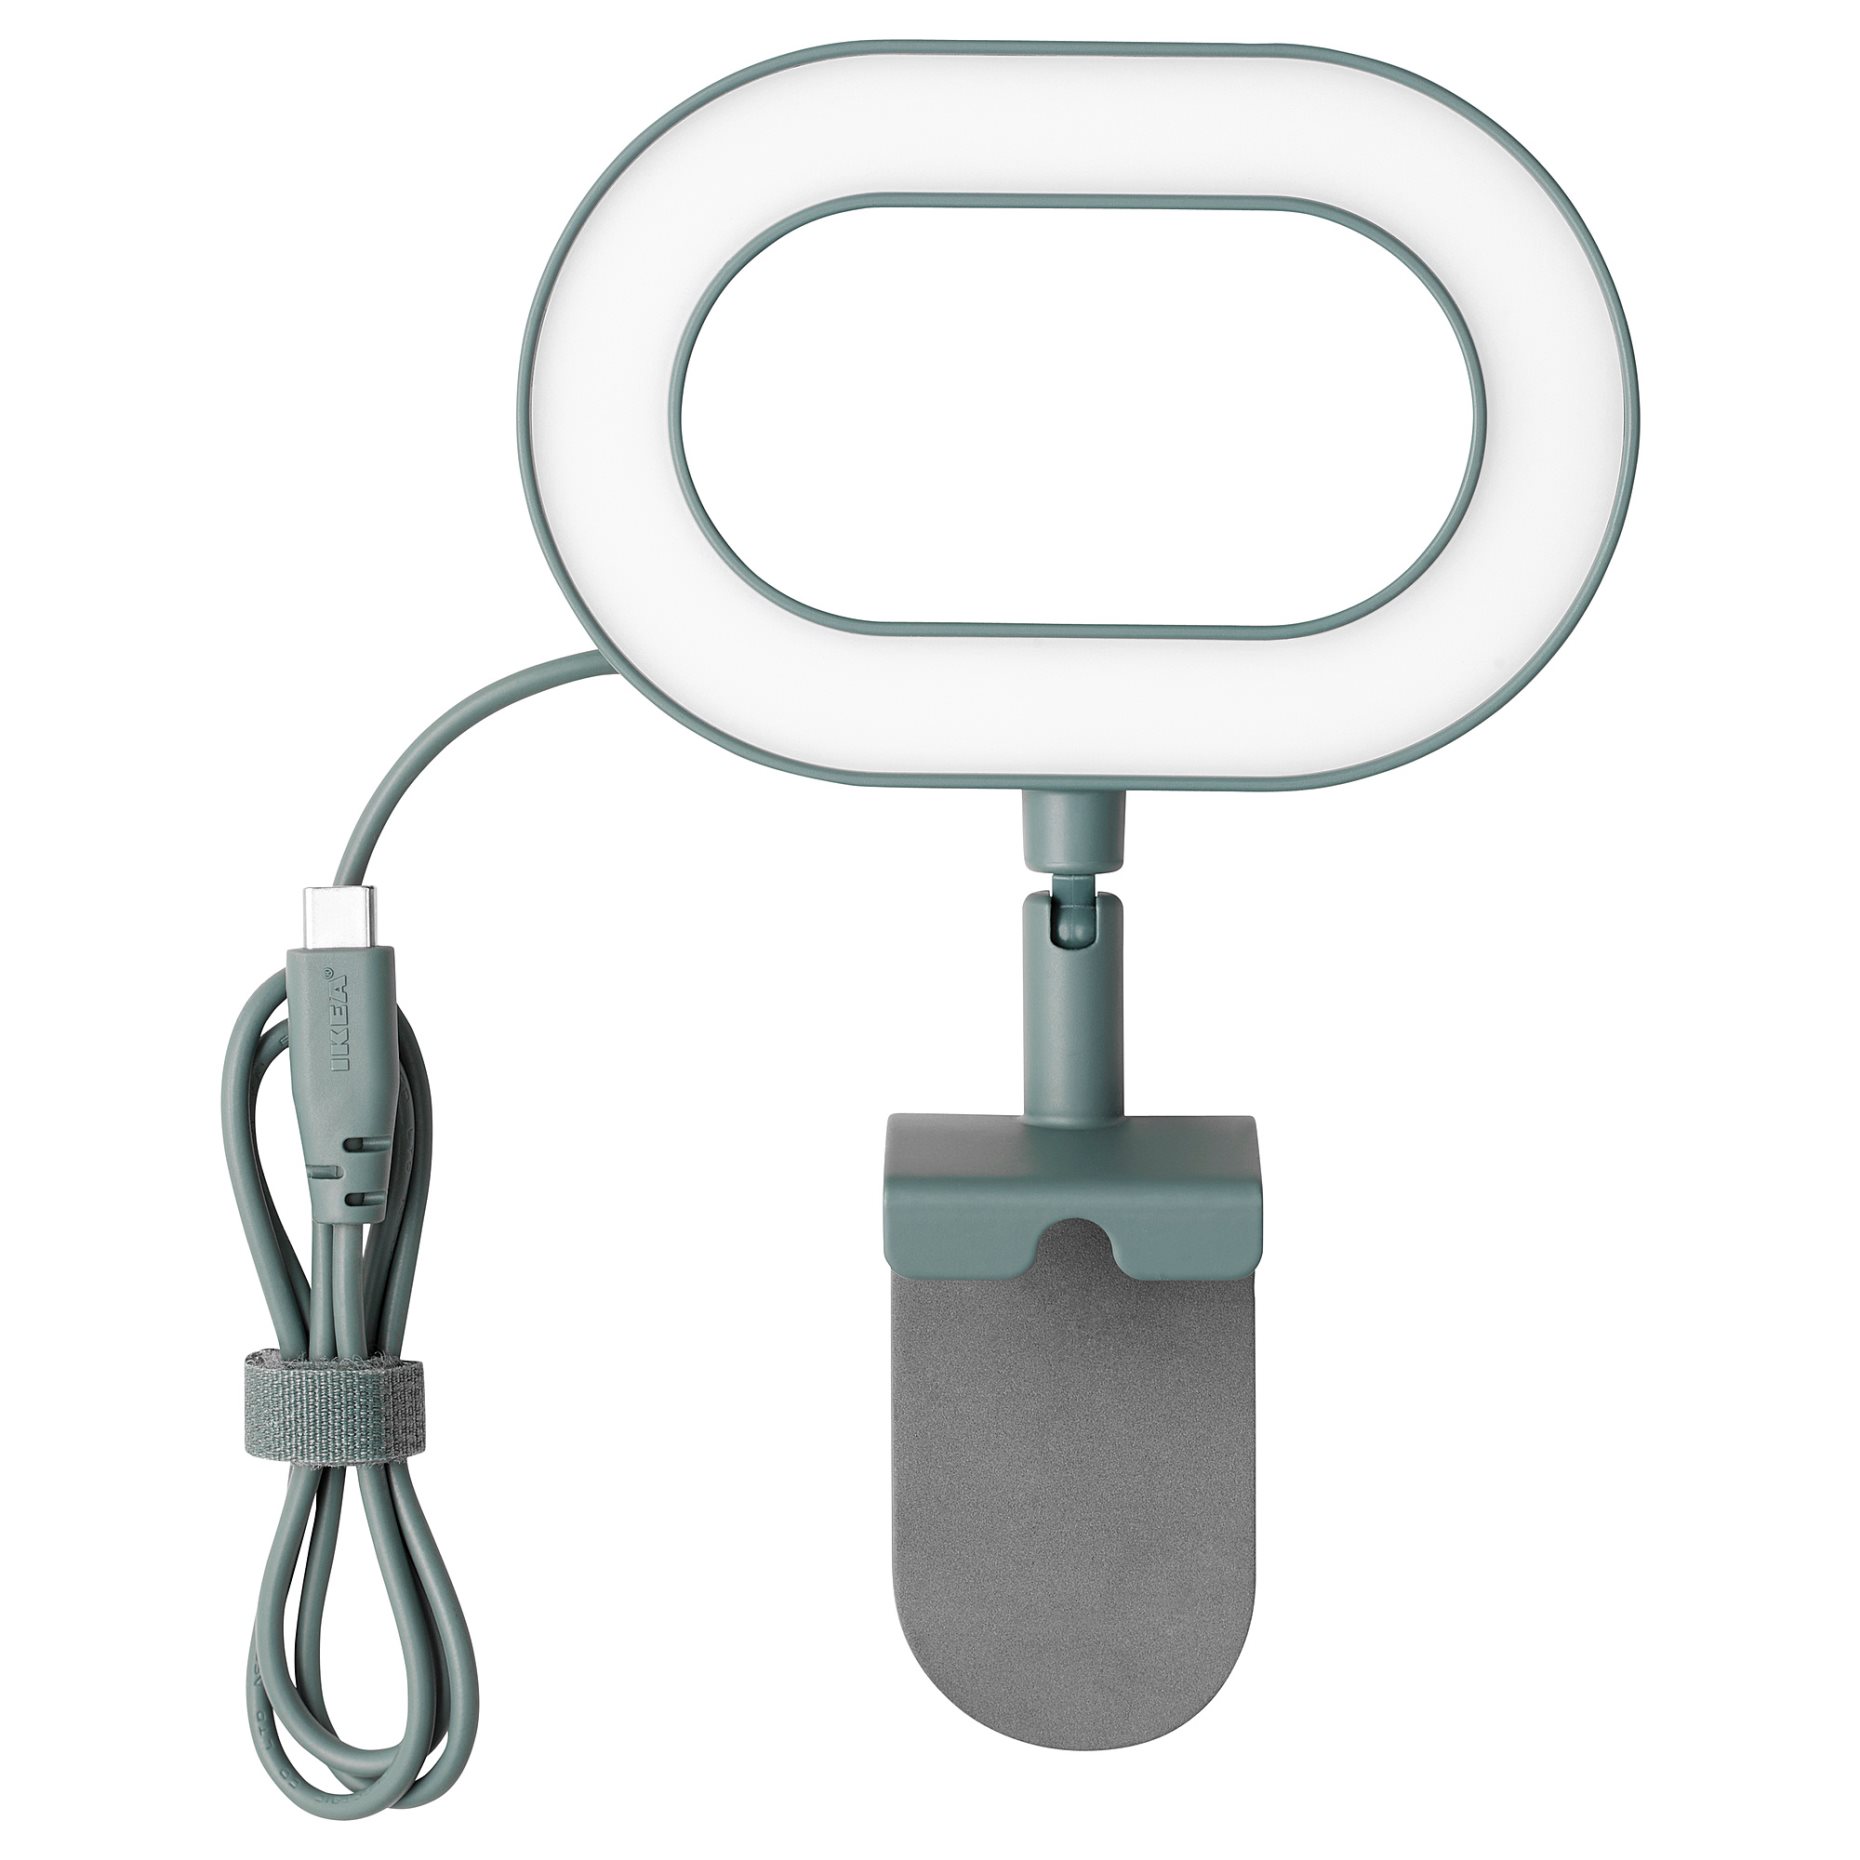 STÄNKREGN, ring lamp with built-in LED light source/dimmable, 005.421.54